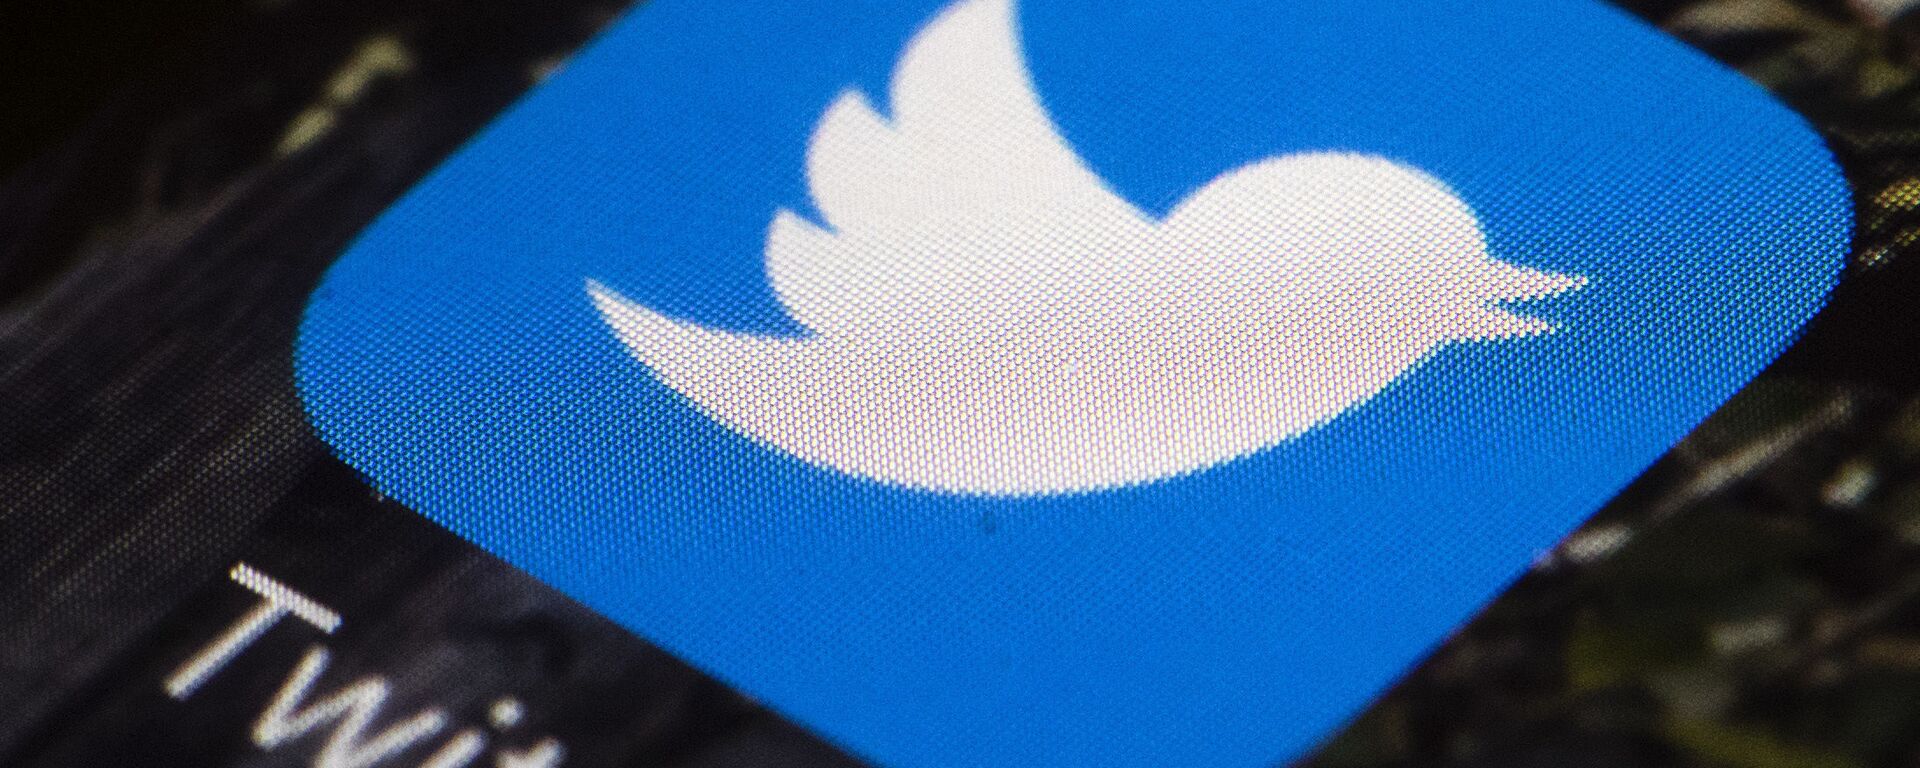 This April 26, 2017, file photo shows the Twitter app icon on a mobile phone in Philadelphia. A tech-focused civil liberties group on Tuesday, June 2, 2020, sued to block President Donald Trump's executive order that seeks to regulate social media, saying it violates the First Amendment and chills speech - Sputnik International, 1920, 25.05.2021